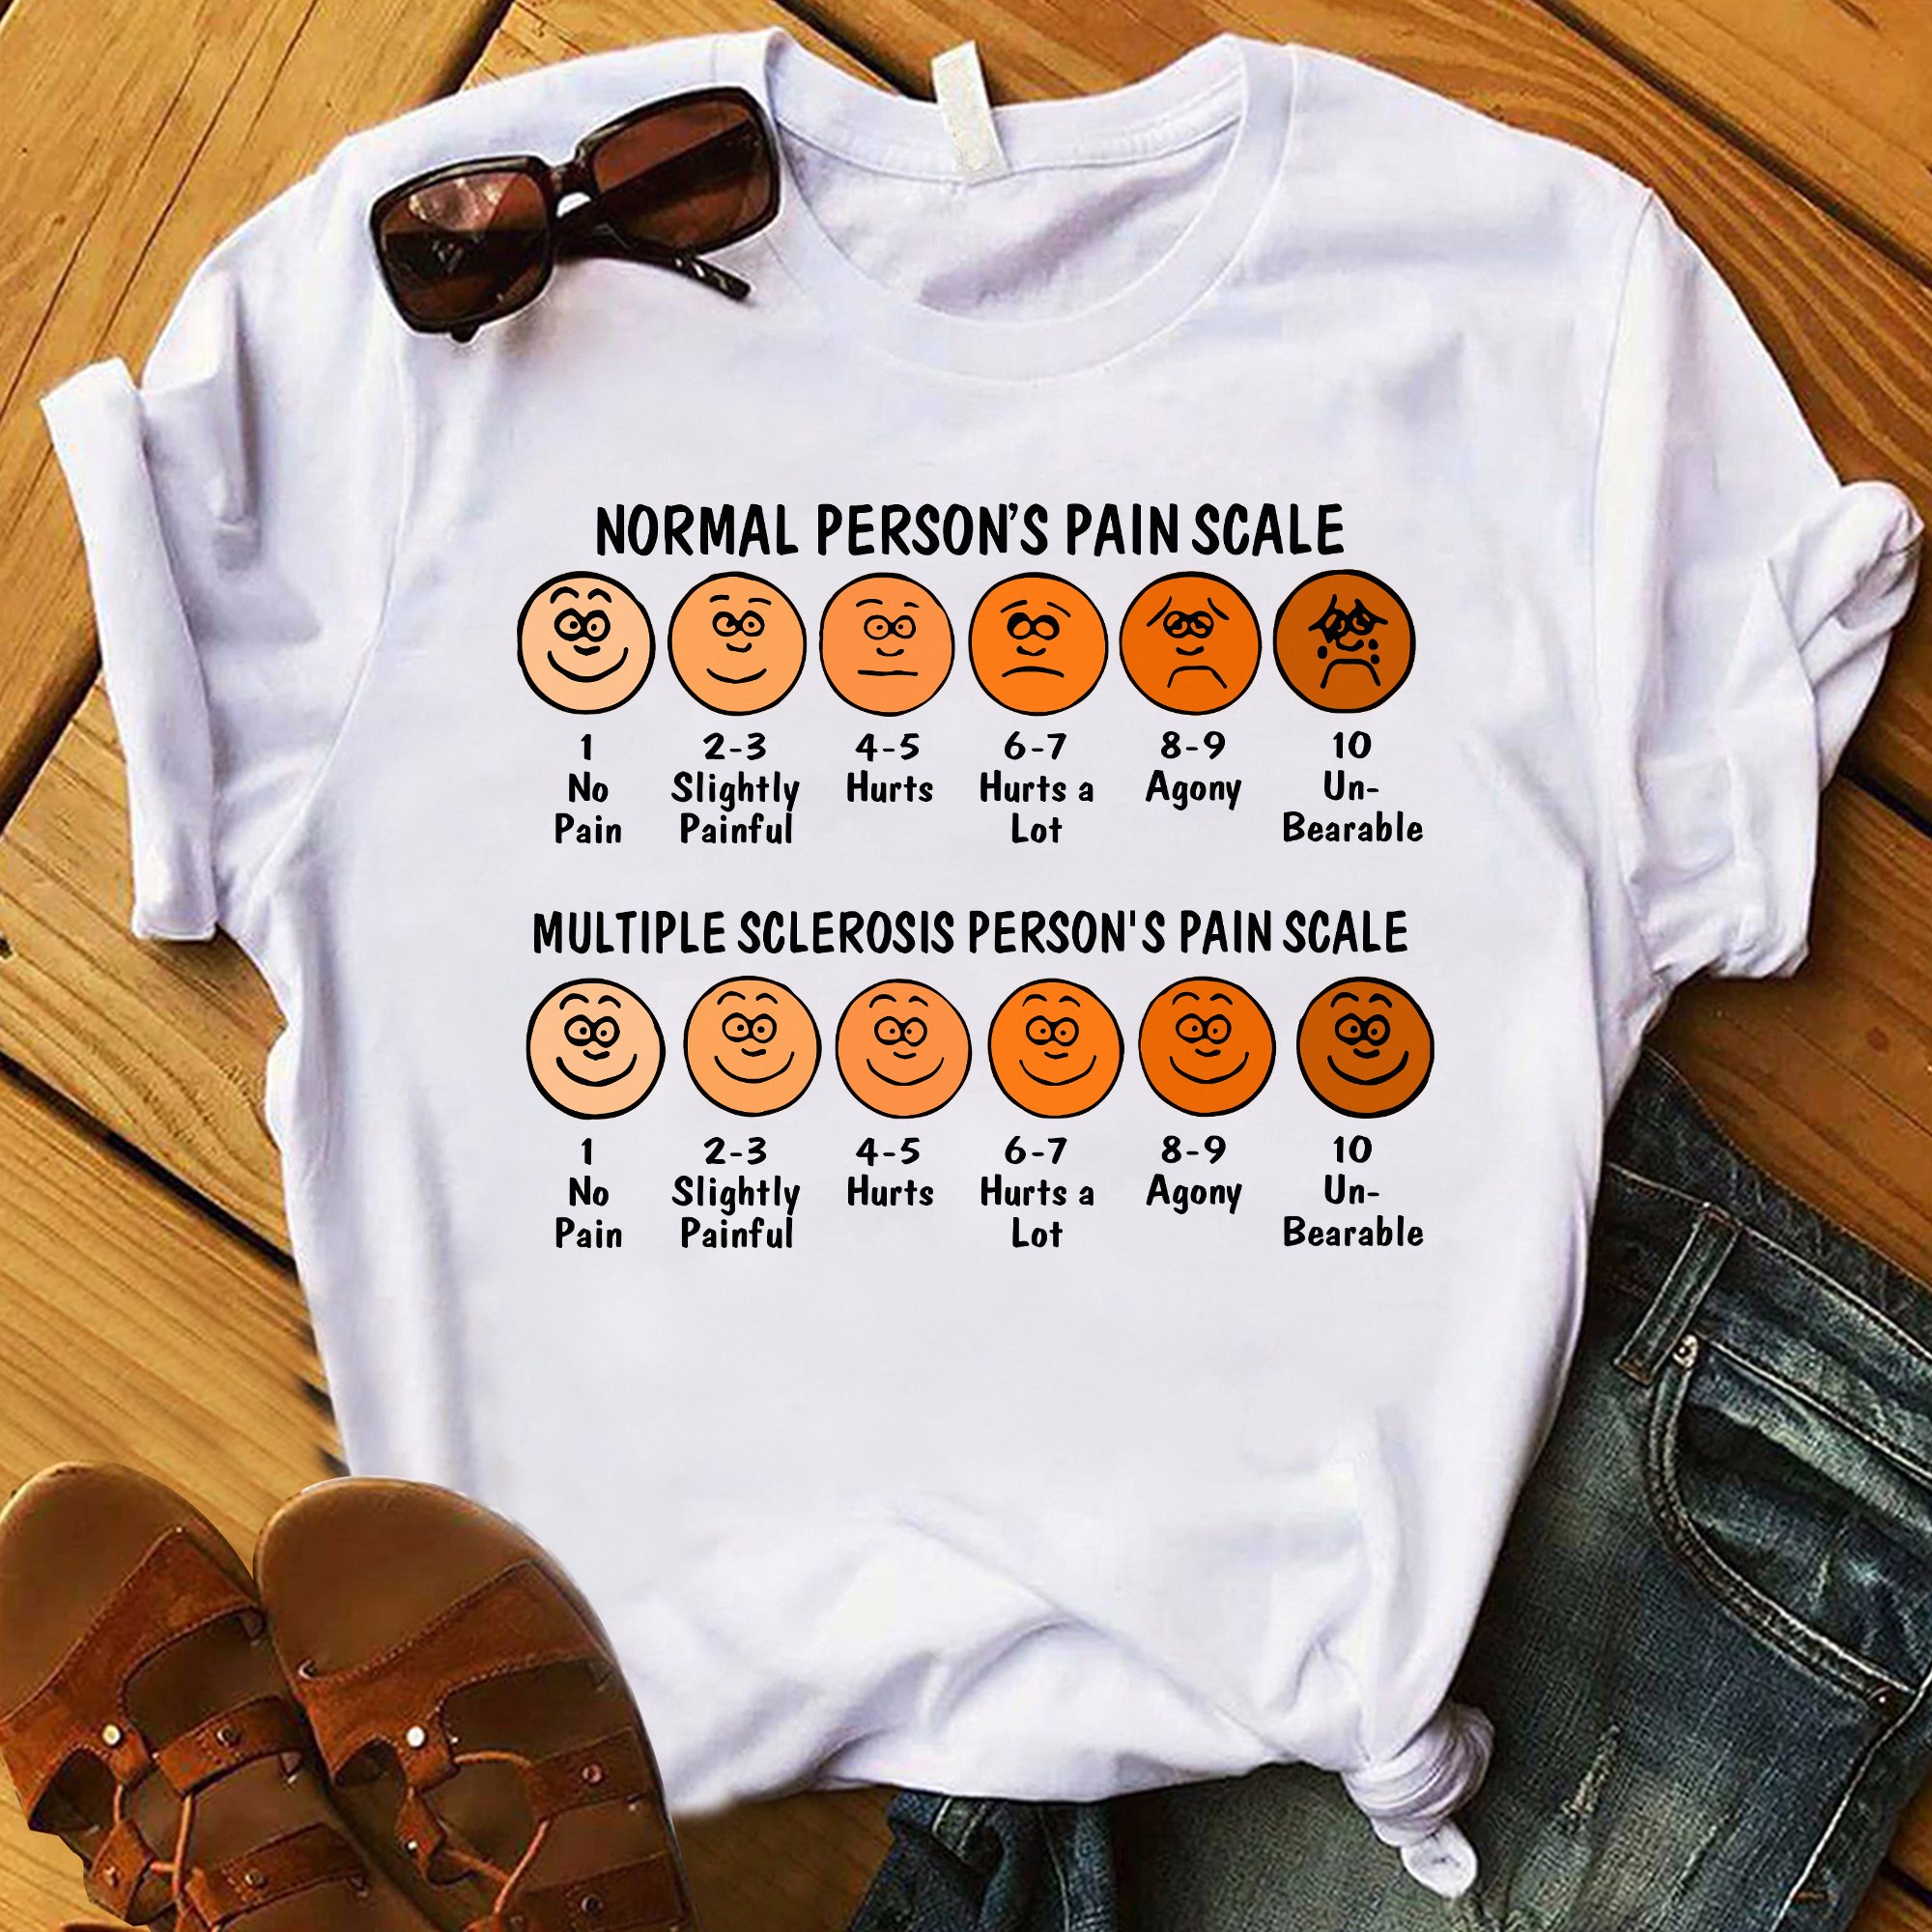 Normal person's pain scale and multiple sclerosis person's pain scale